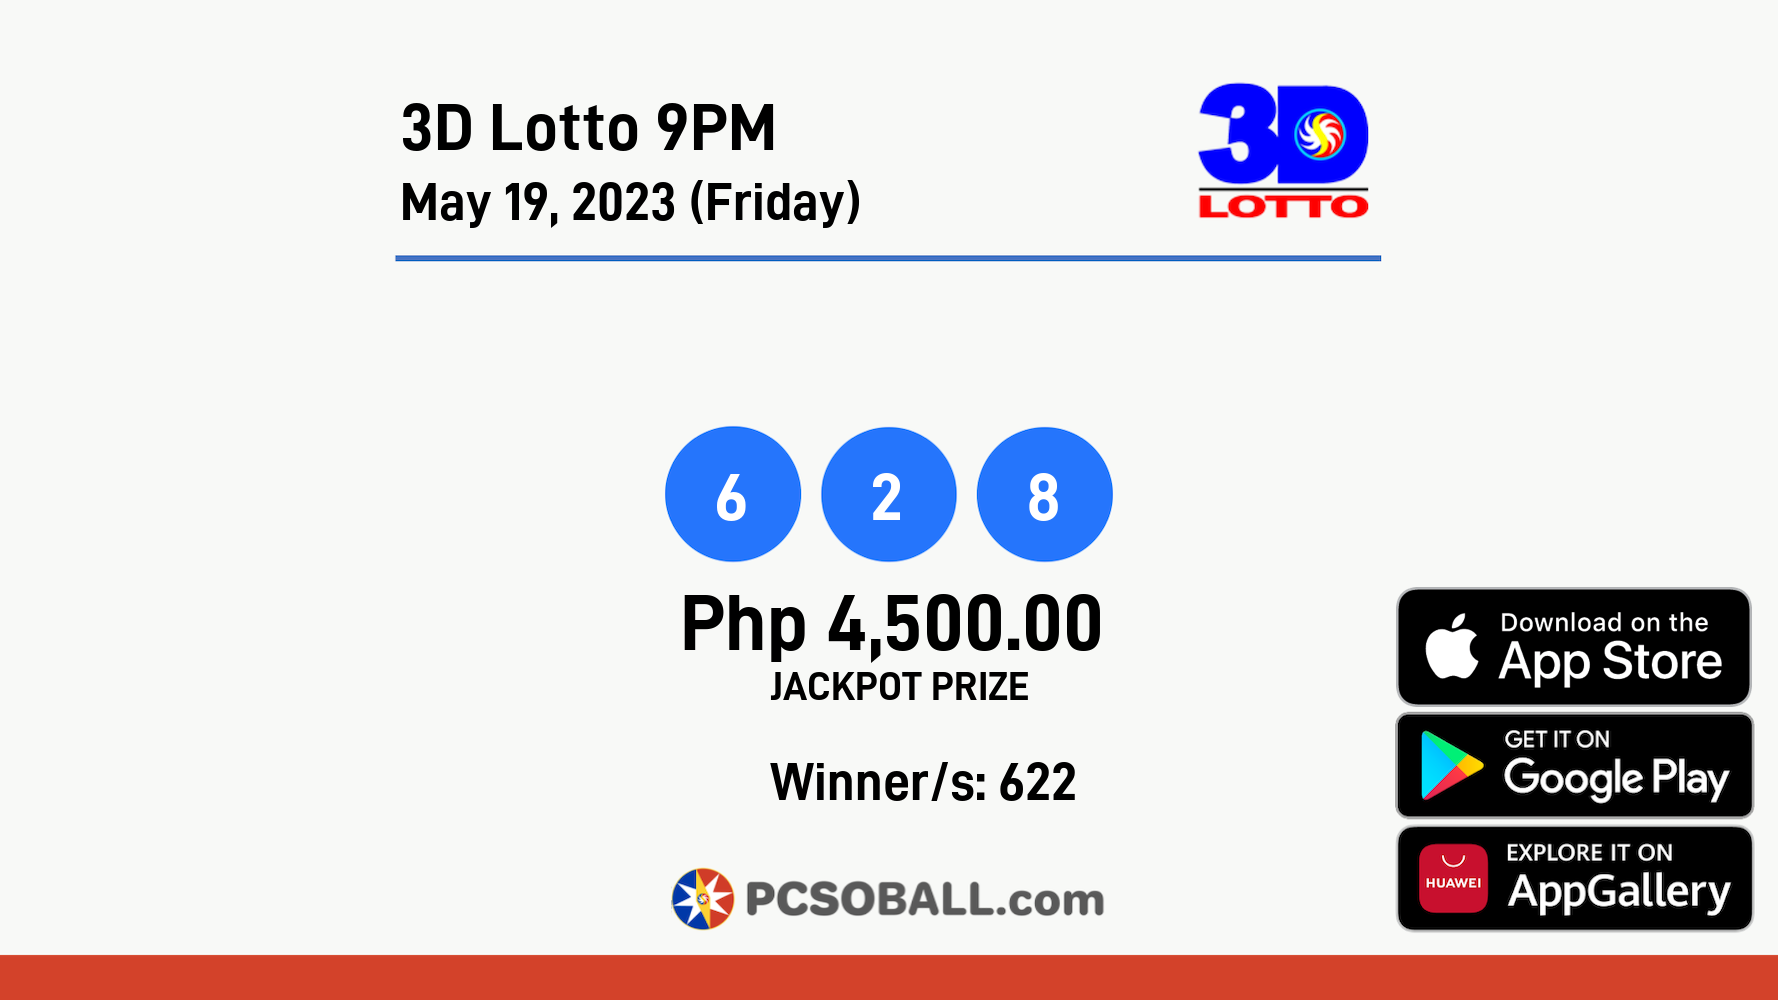 3D Lotto 9PM May 19, 2023 (Friday) Result